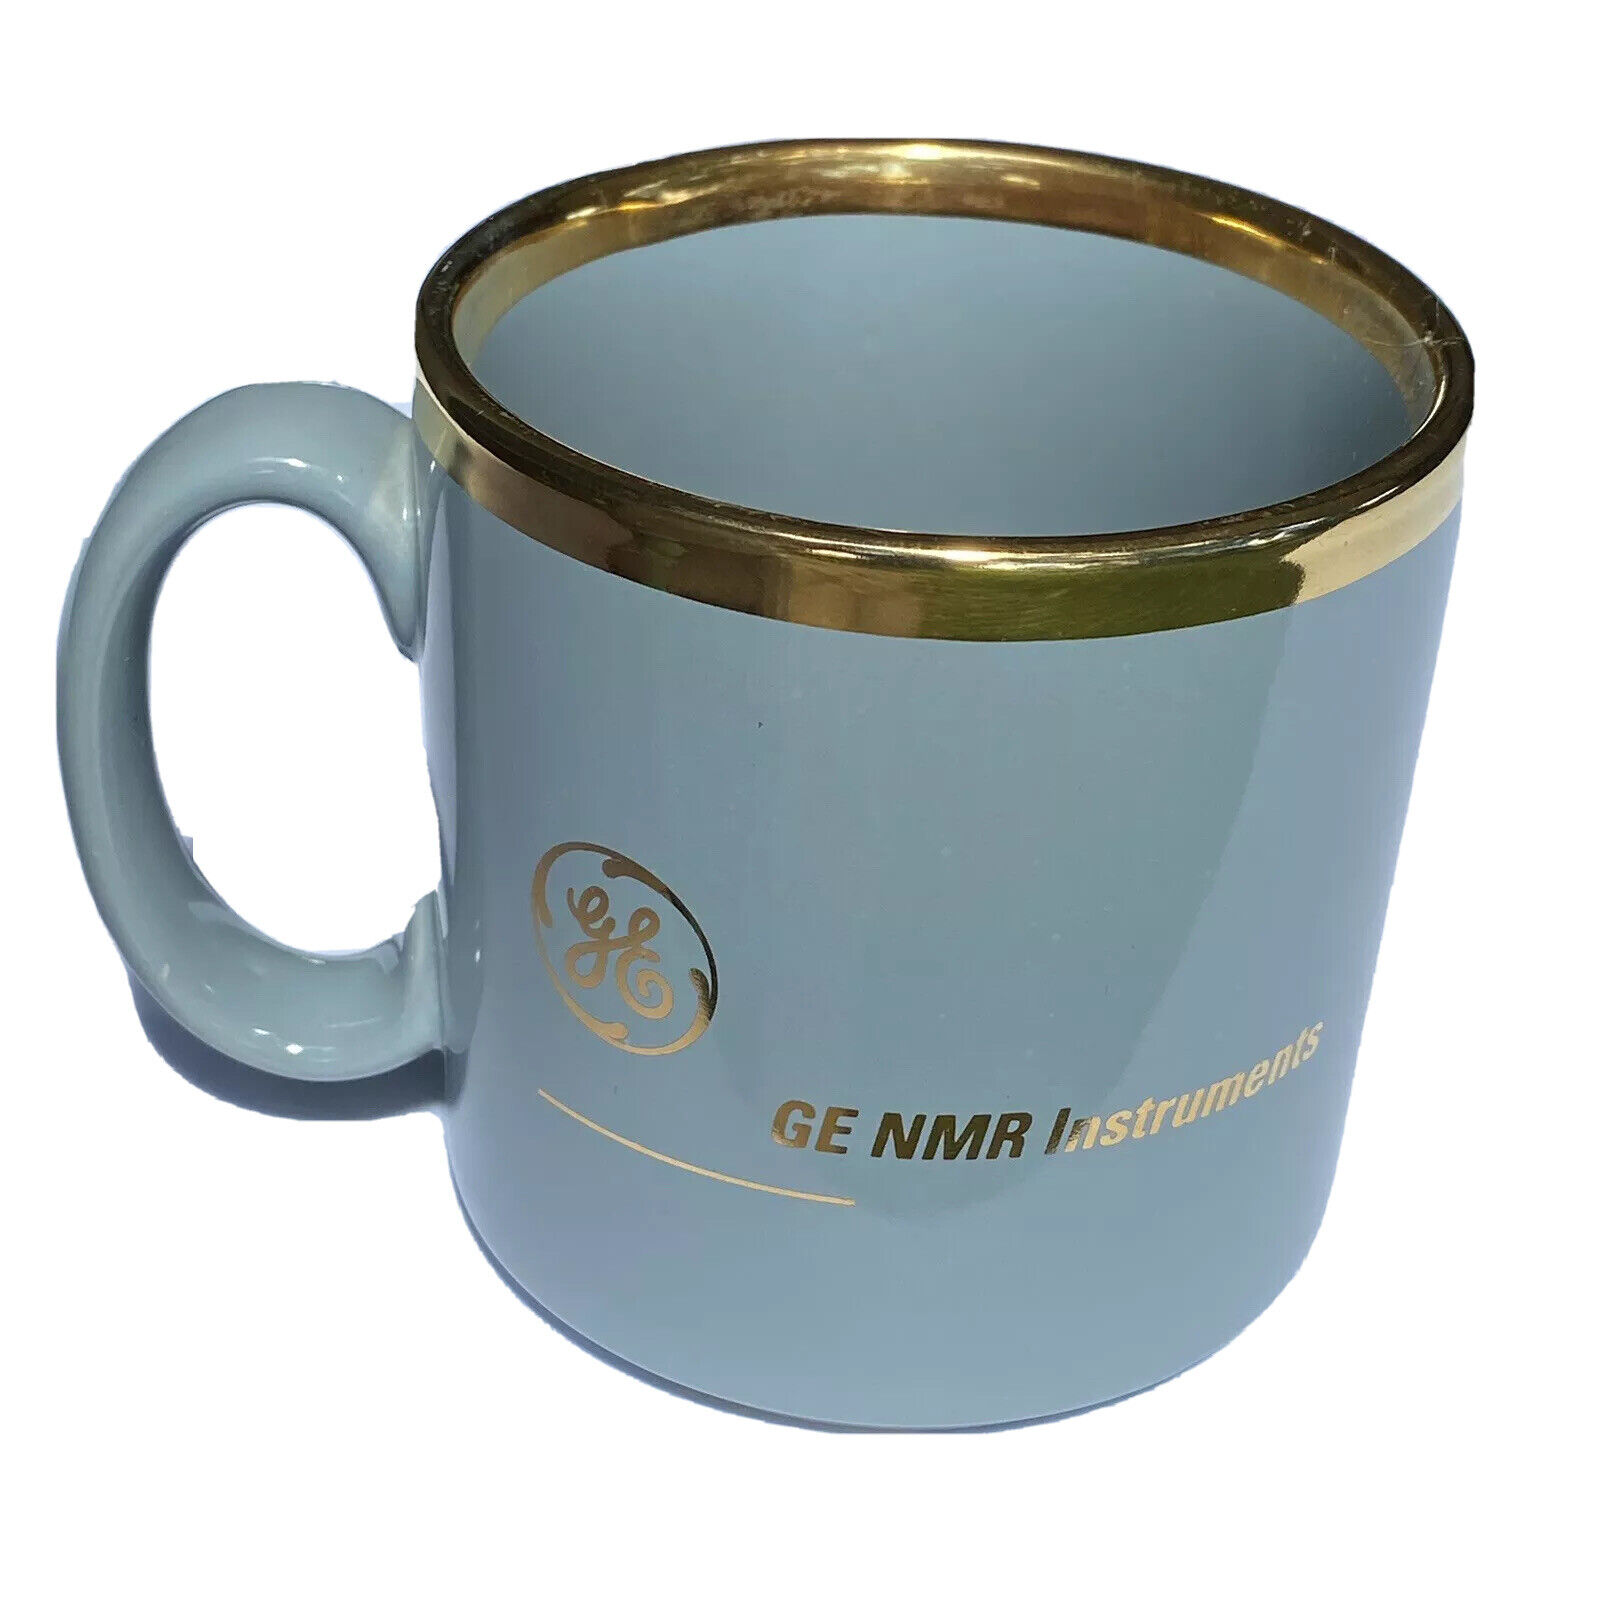 GE General Electric Ceramic Coffee Mug Cup Made England Blue Gold NMR Instrument